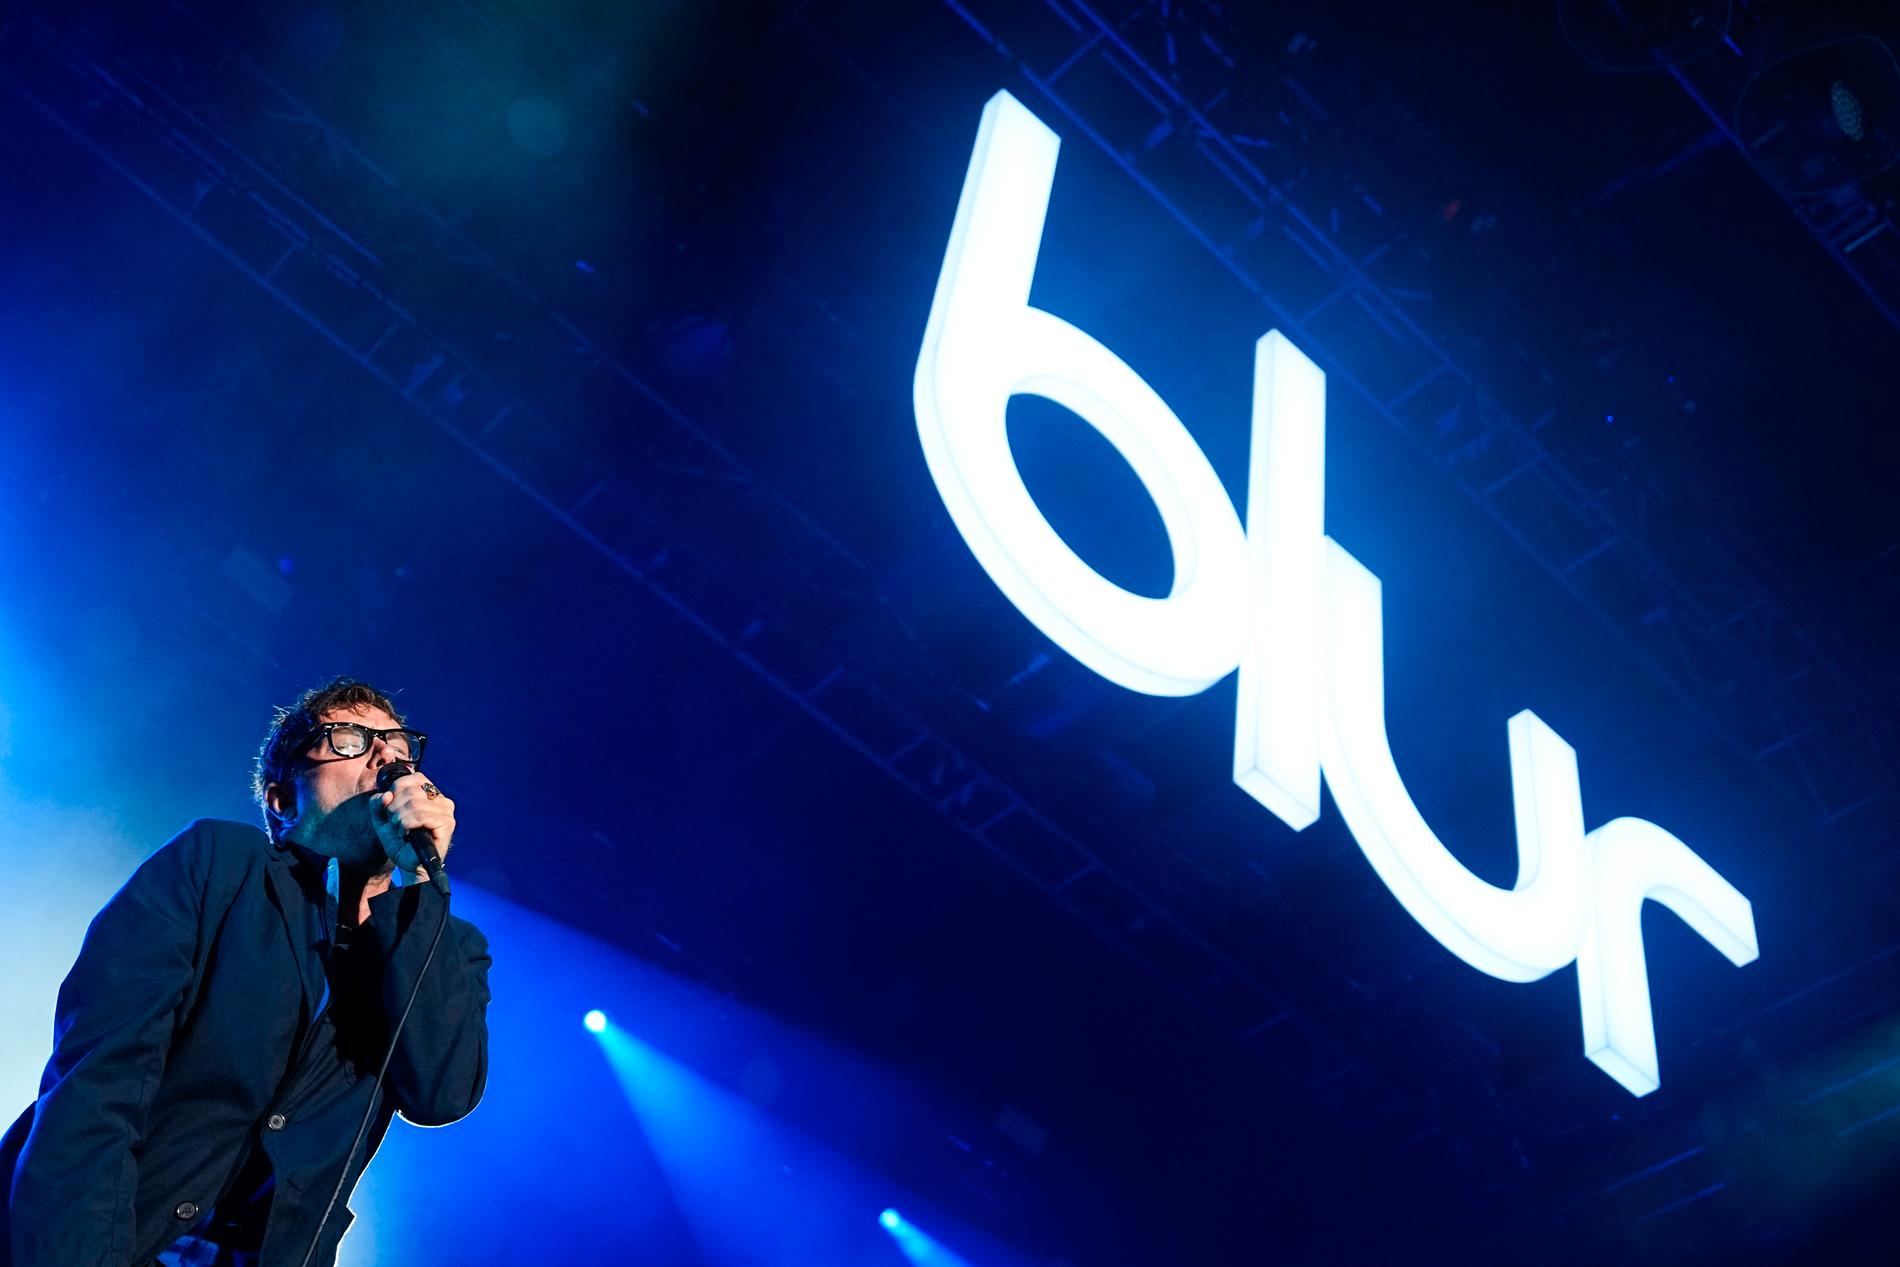 Concert review: Blur for the Suit – VG